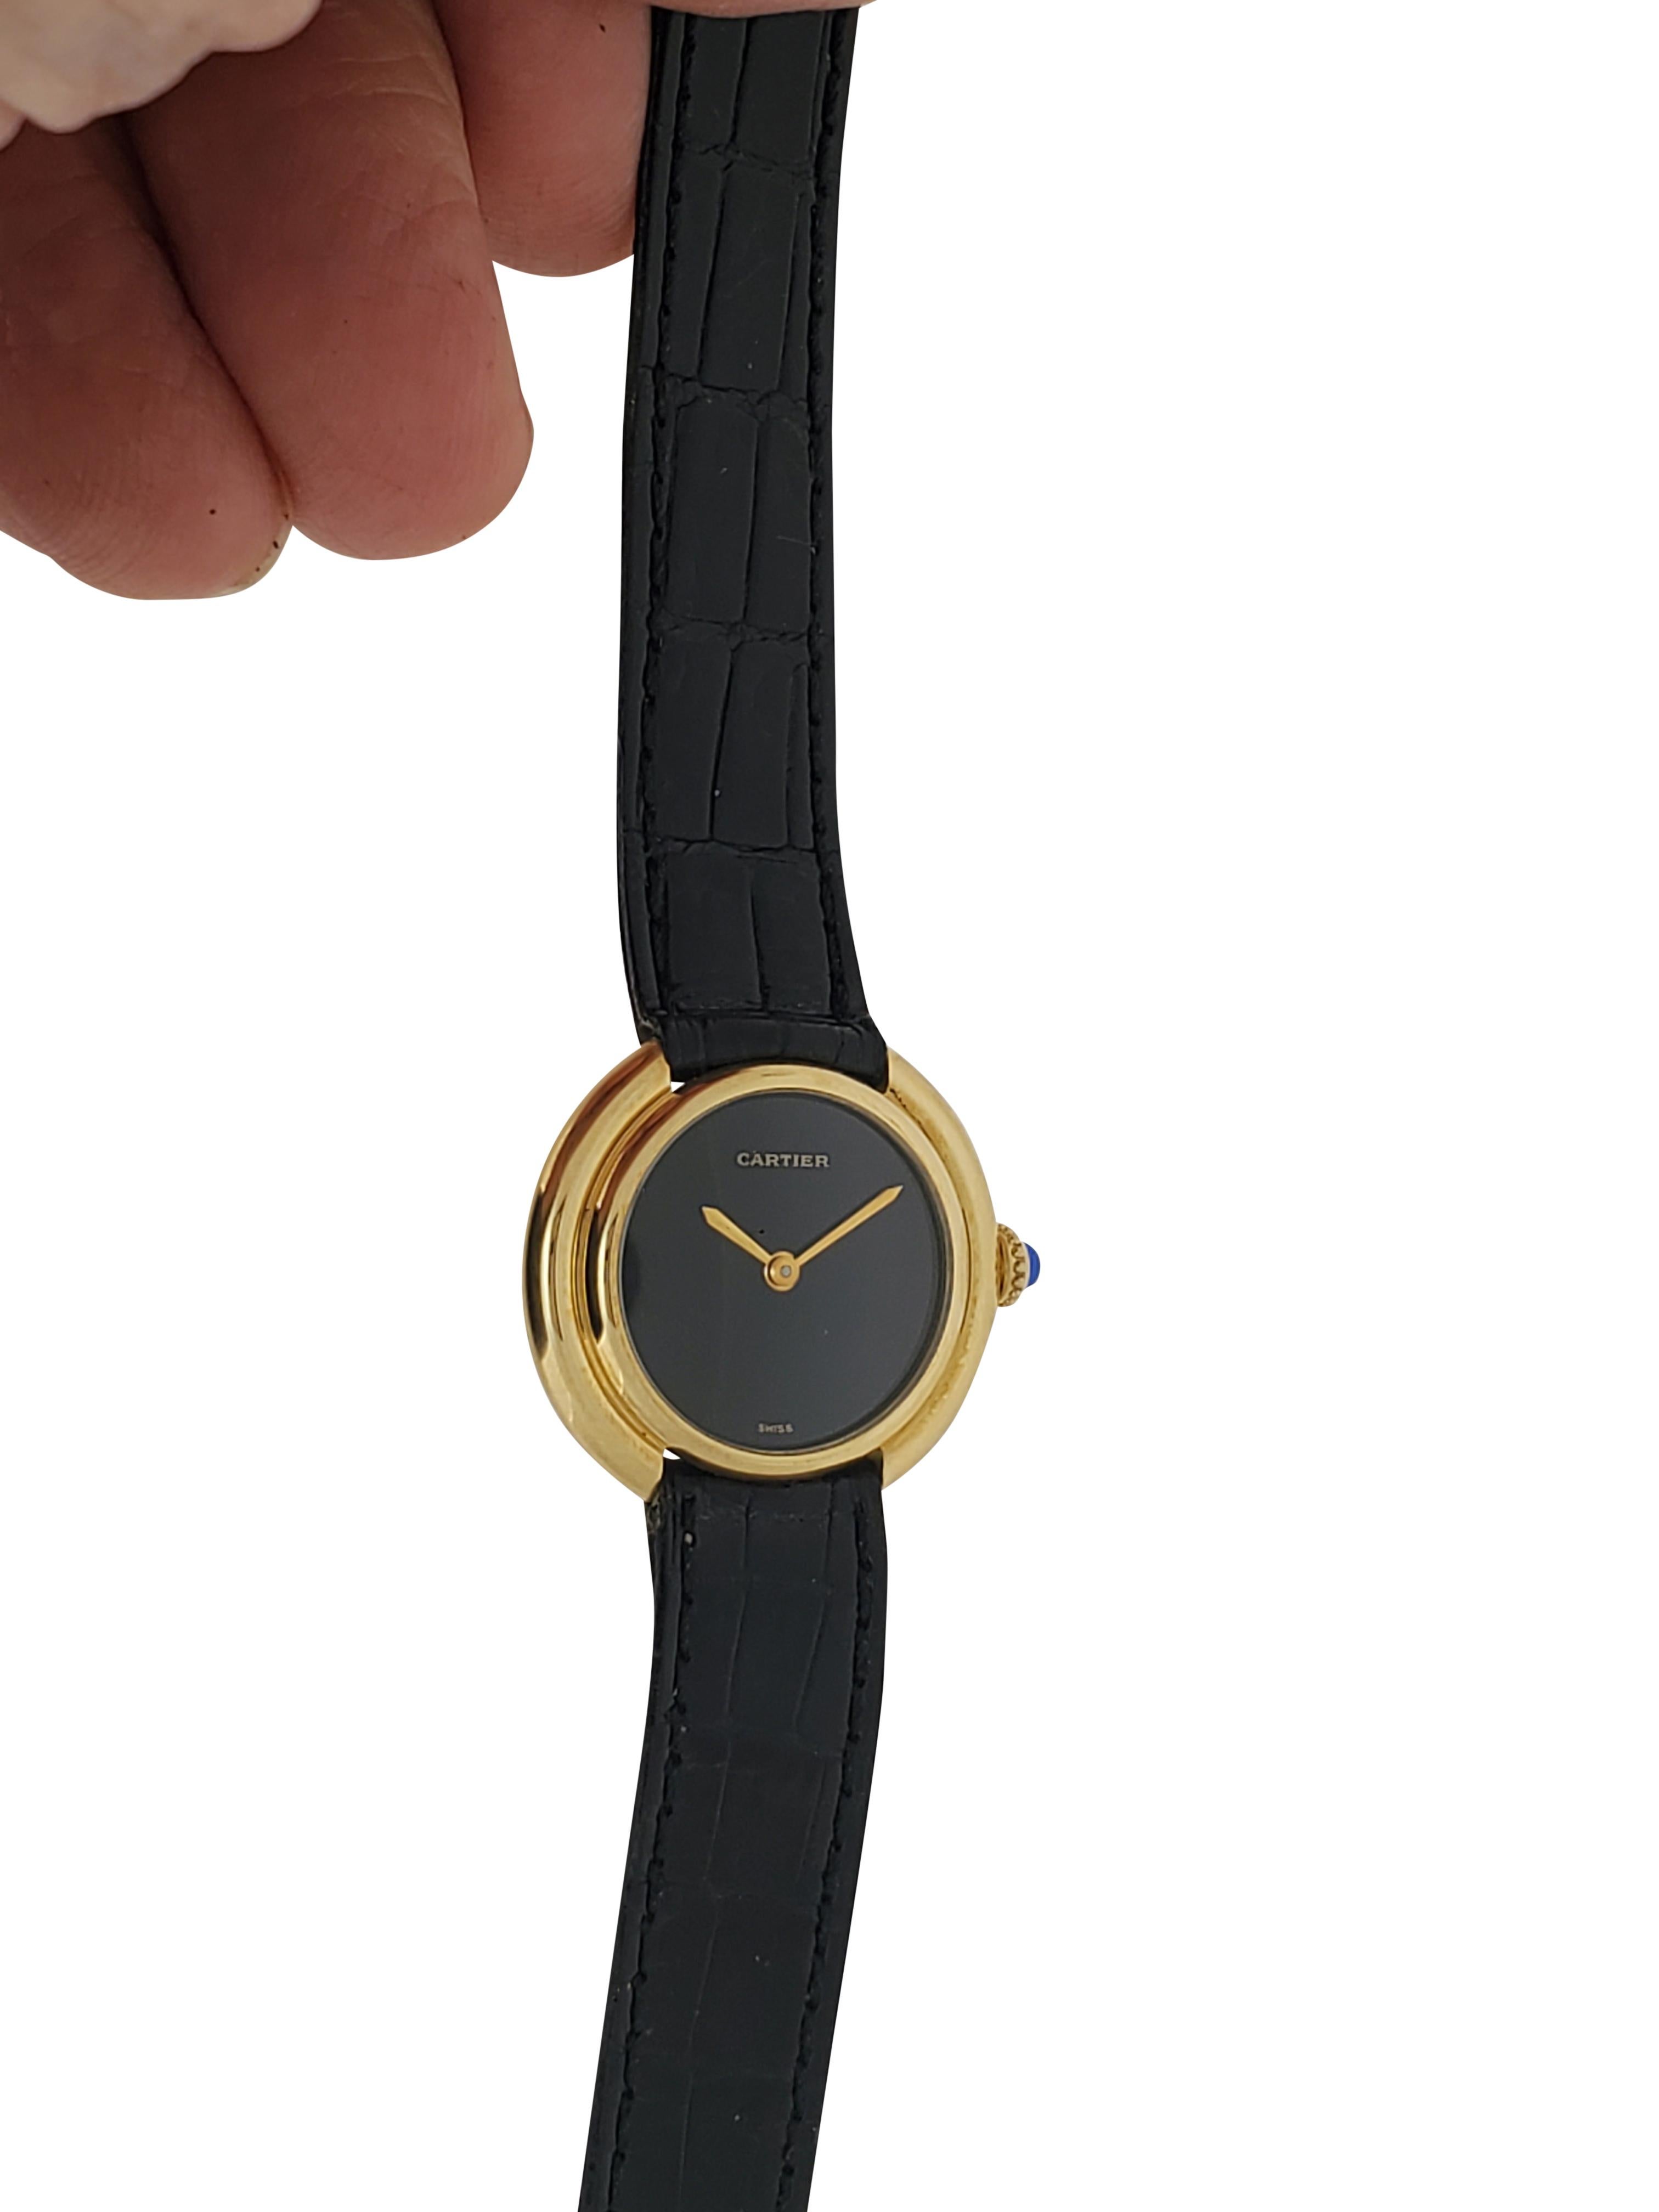 Cartier Vendome Small Size with Black Dial circa 1975-1985 For Sale 2